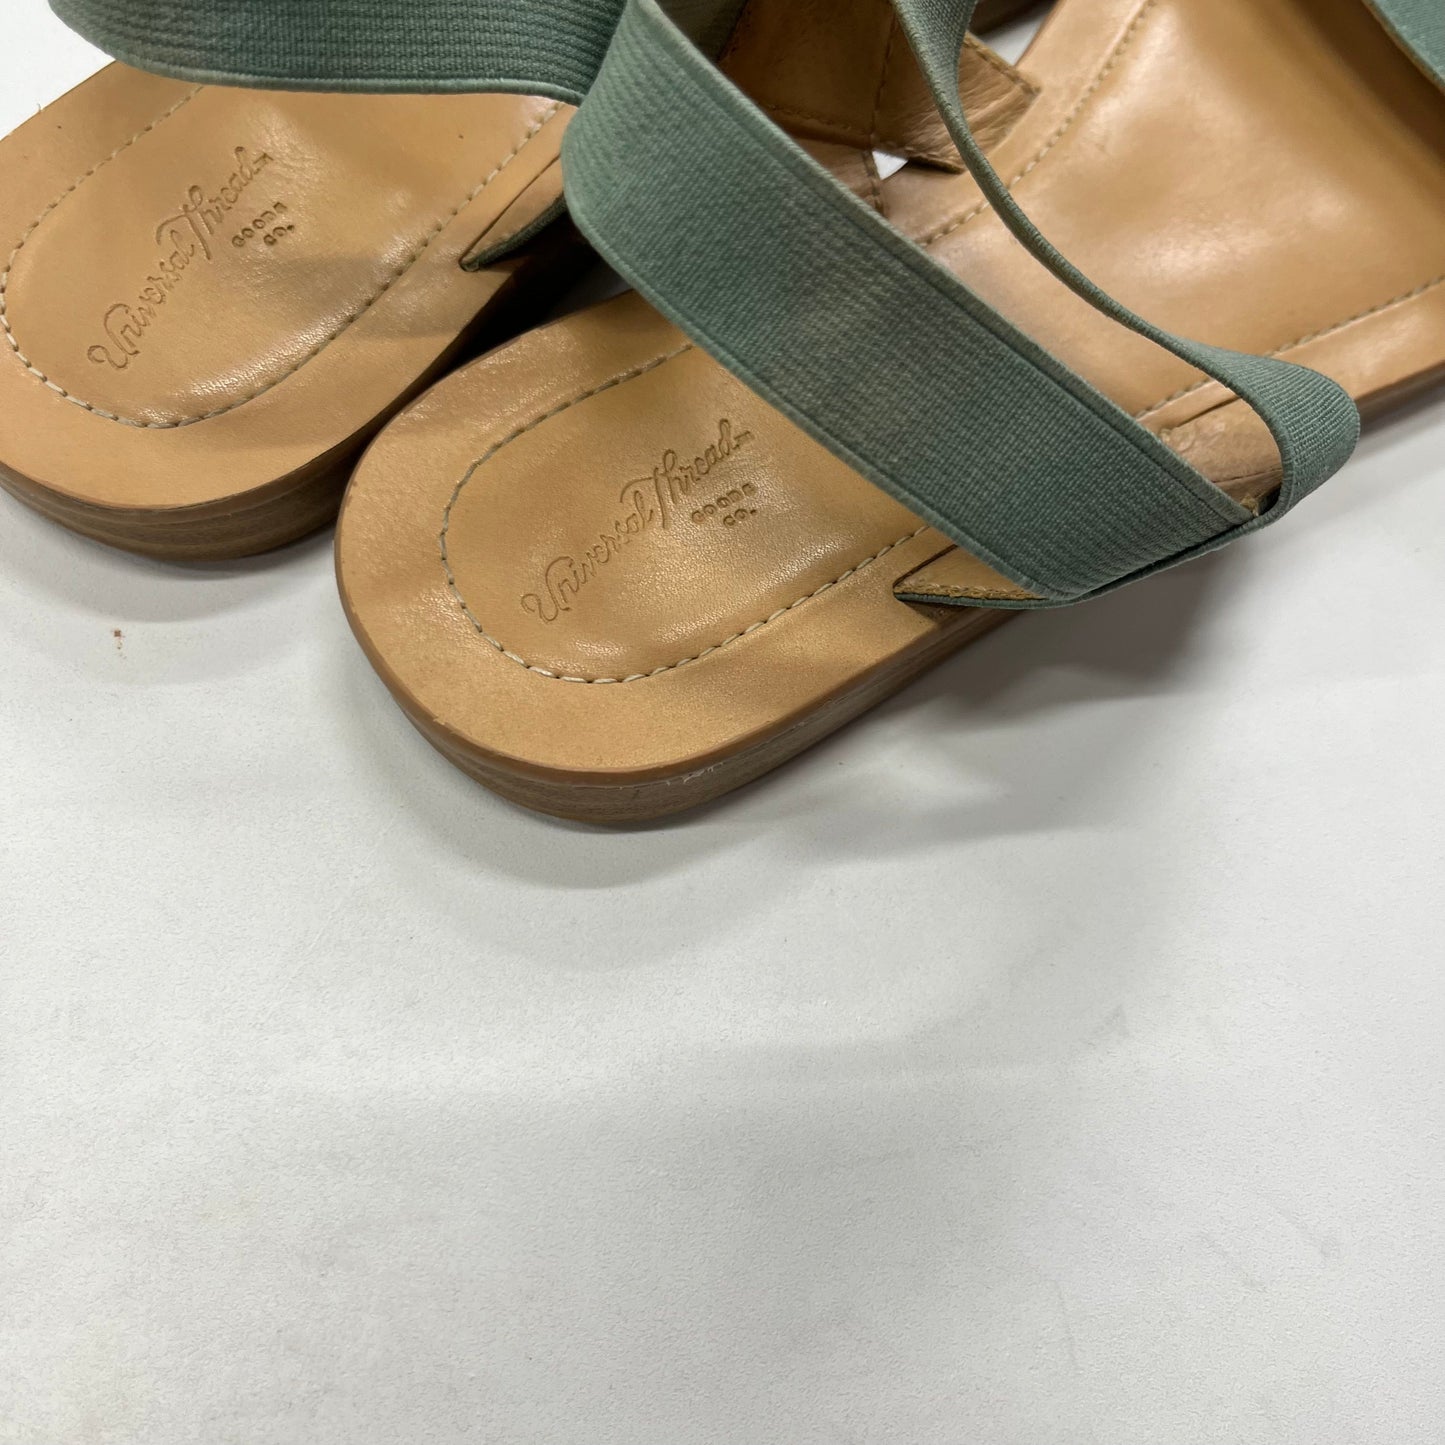 Sandals Flats By Universal Thread  Size: 8.5